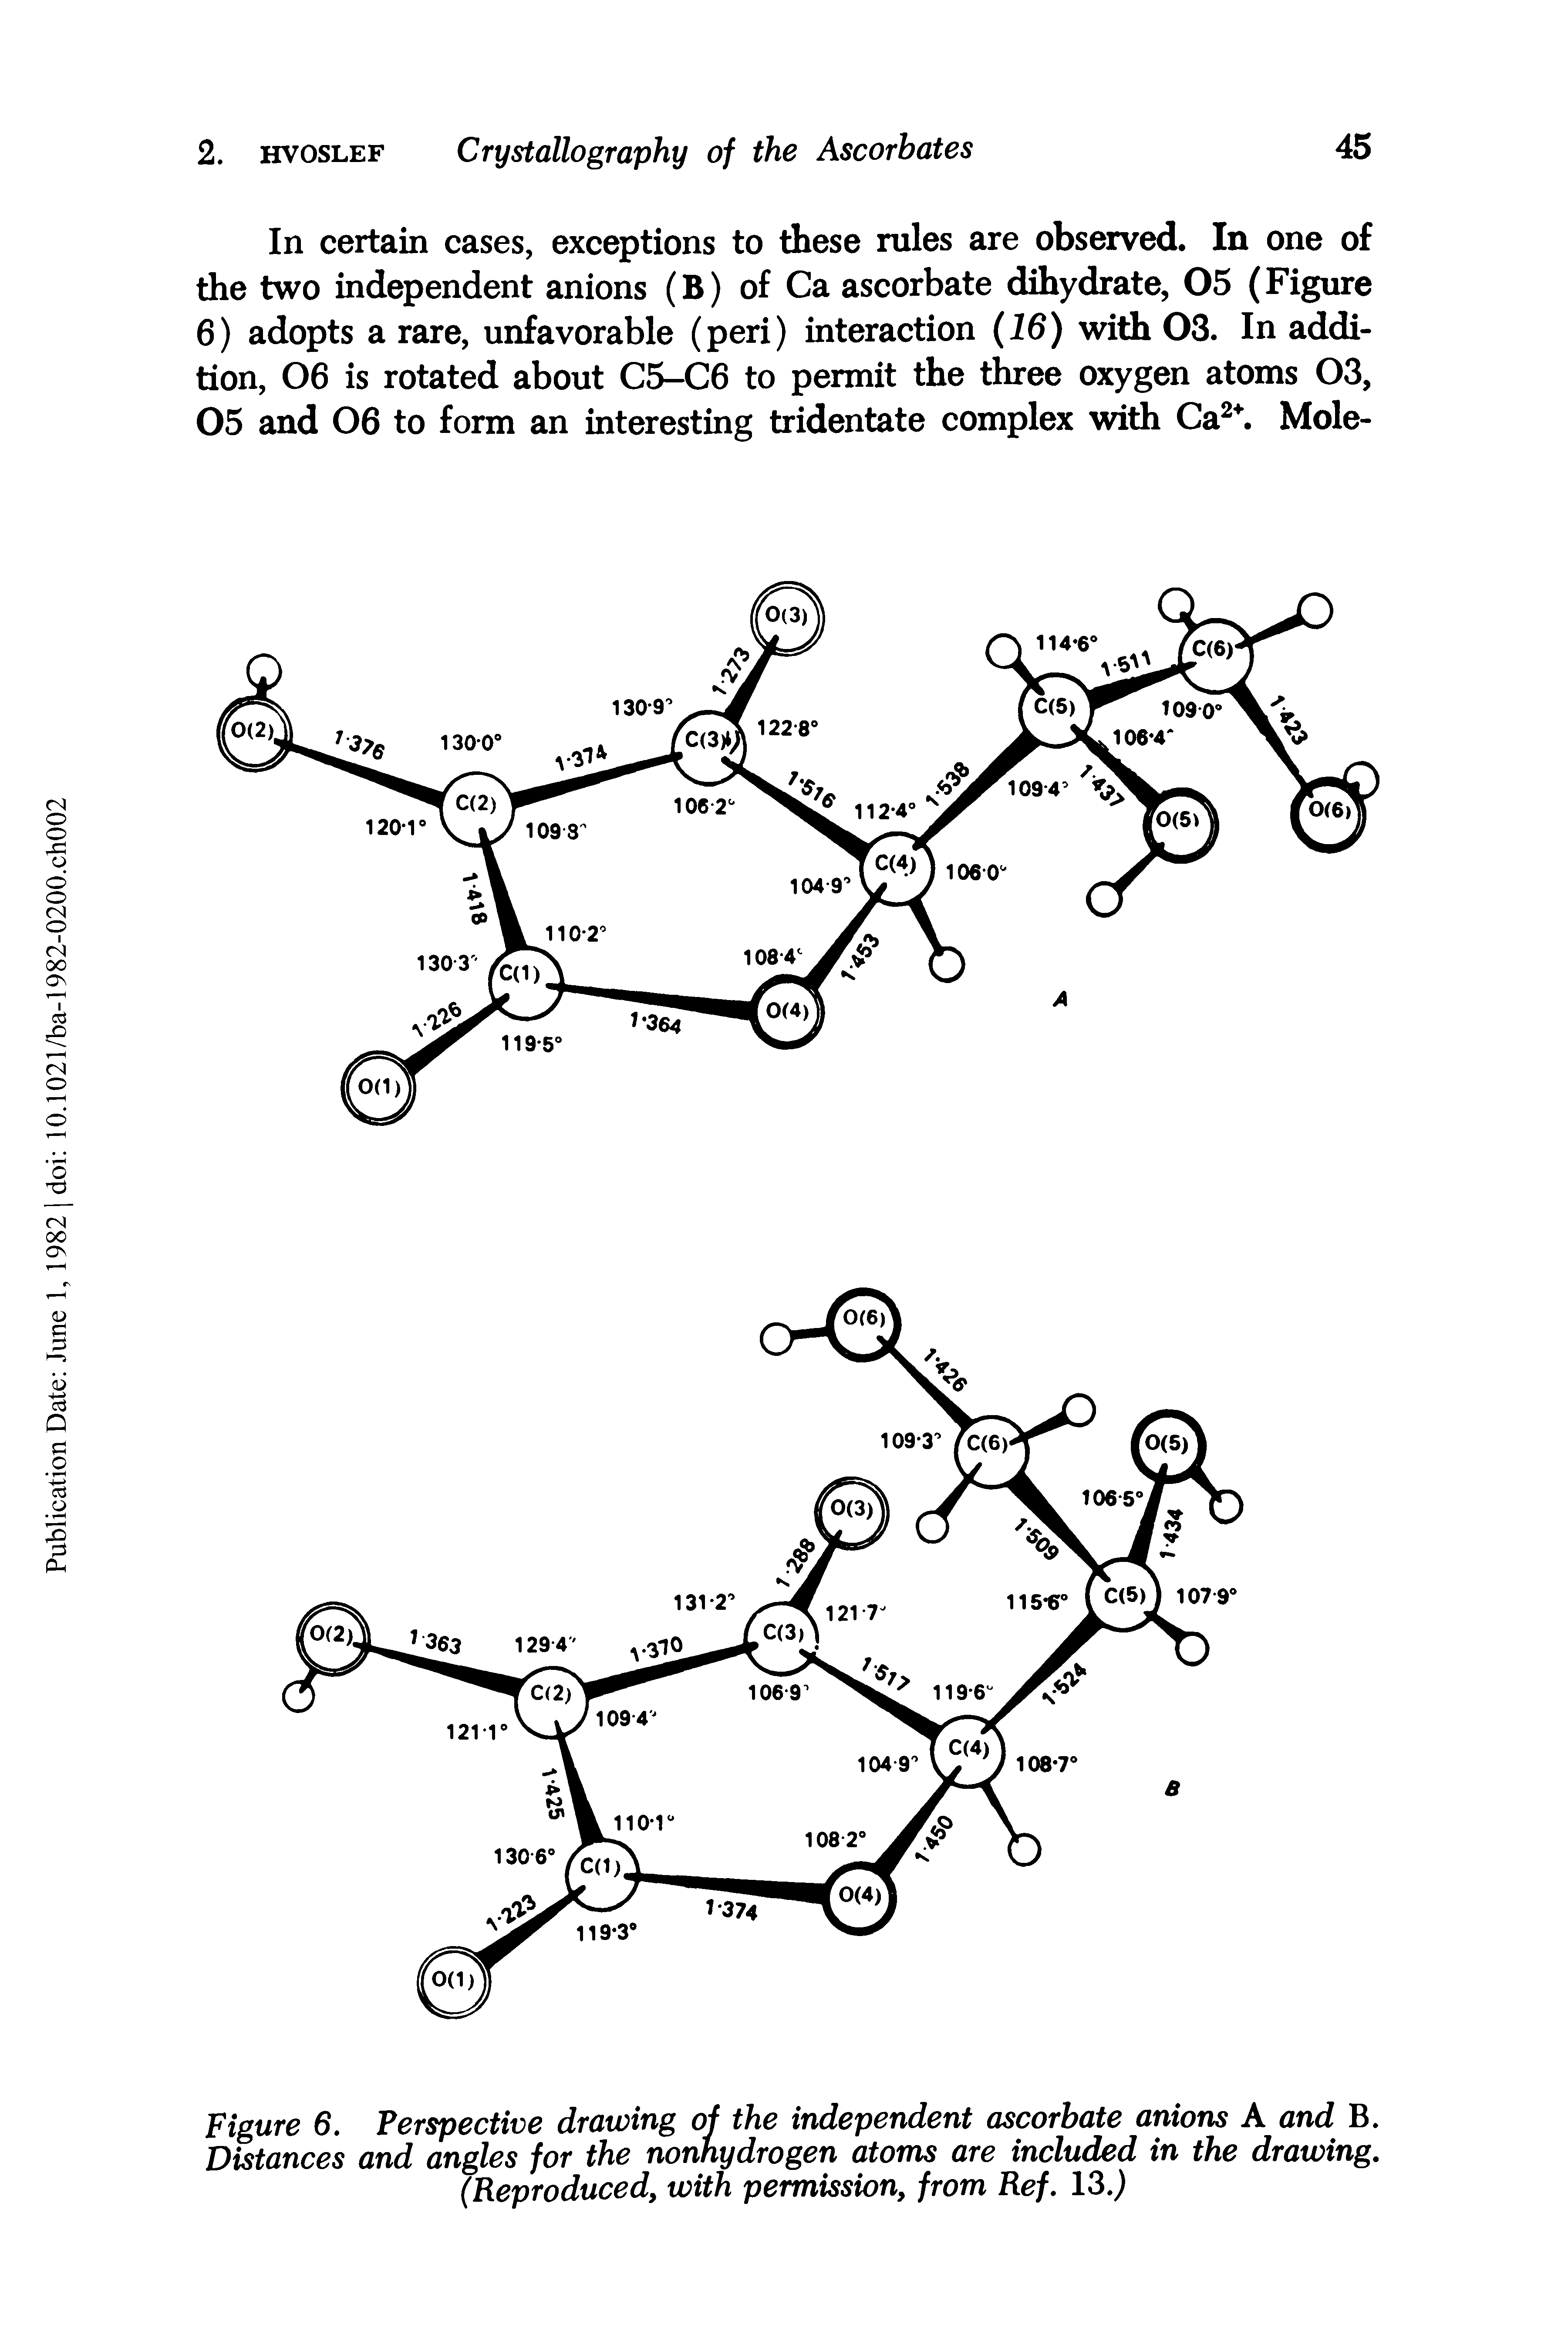 Figure 6. Perspective drawing of the independent ascorbate anions A and B. Distances and angles for the nonhydrogen atoms are included in the drawing. (Reproduced, with permission, from Ref. 13. ...